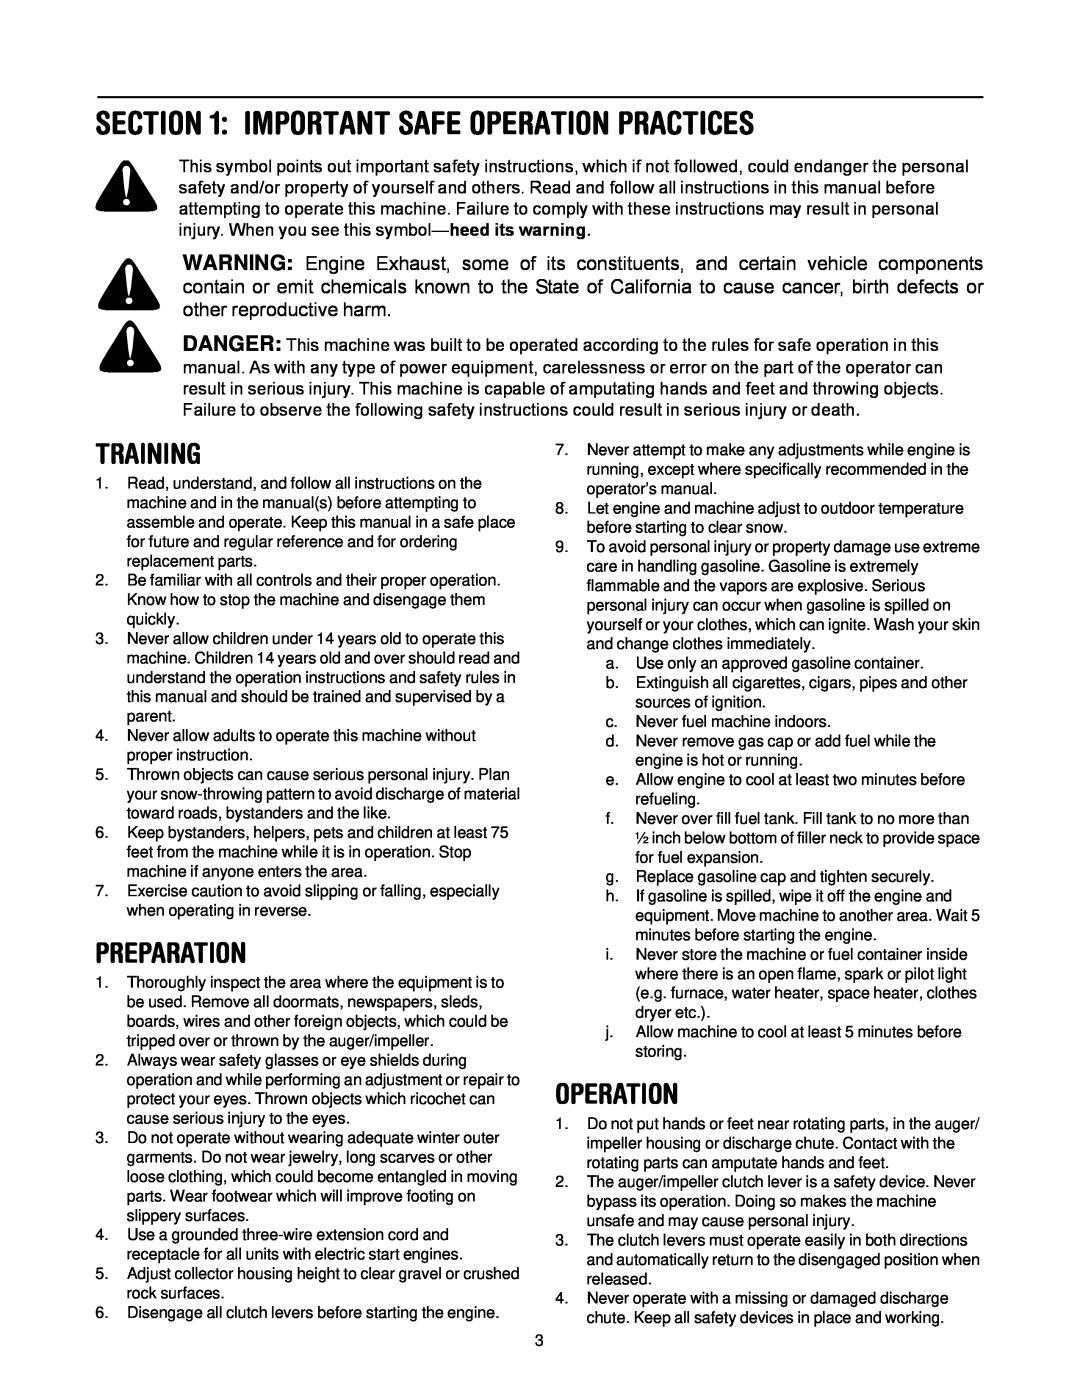 MTD 614E manual Important Safe Operation Practices, Training, Preparation 